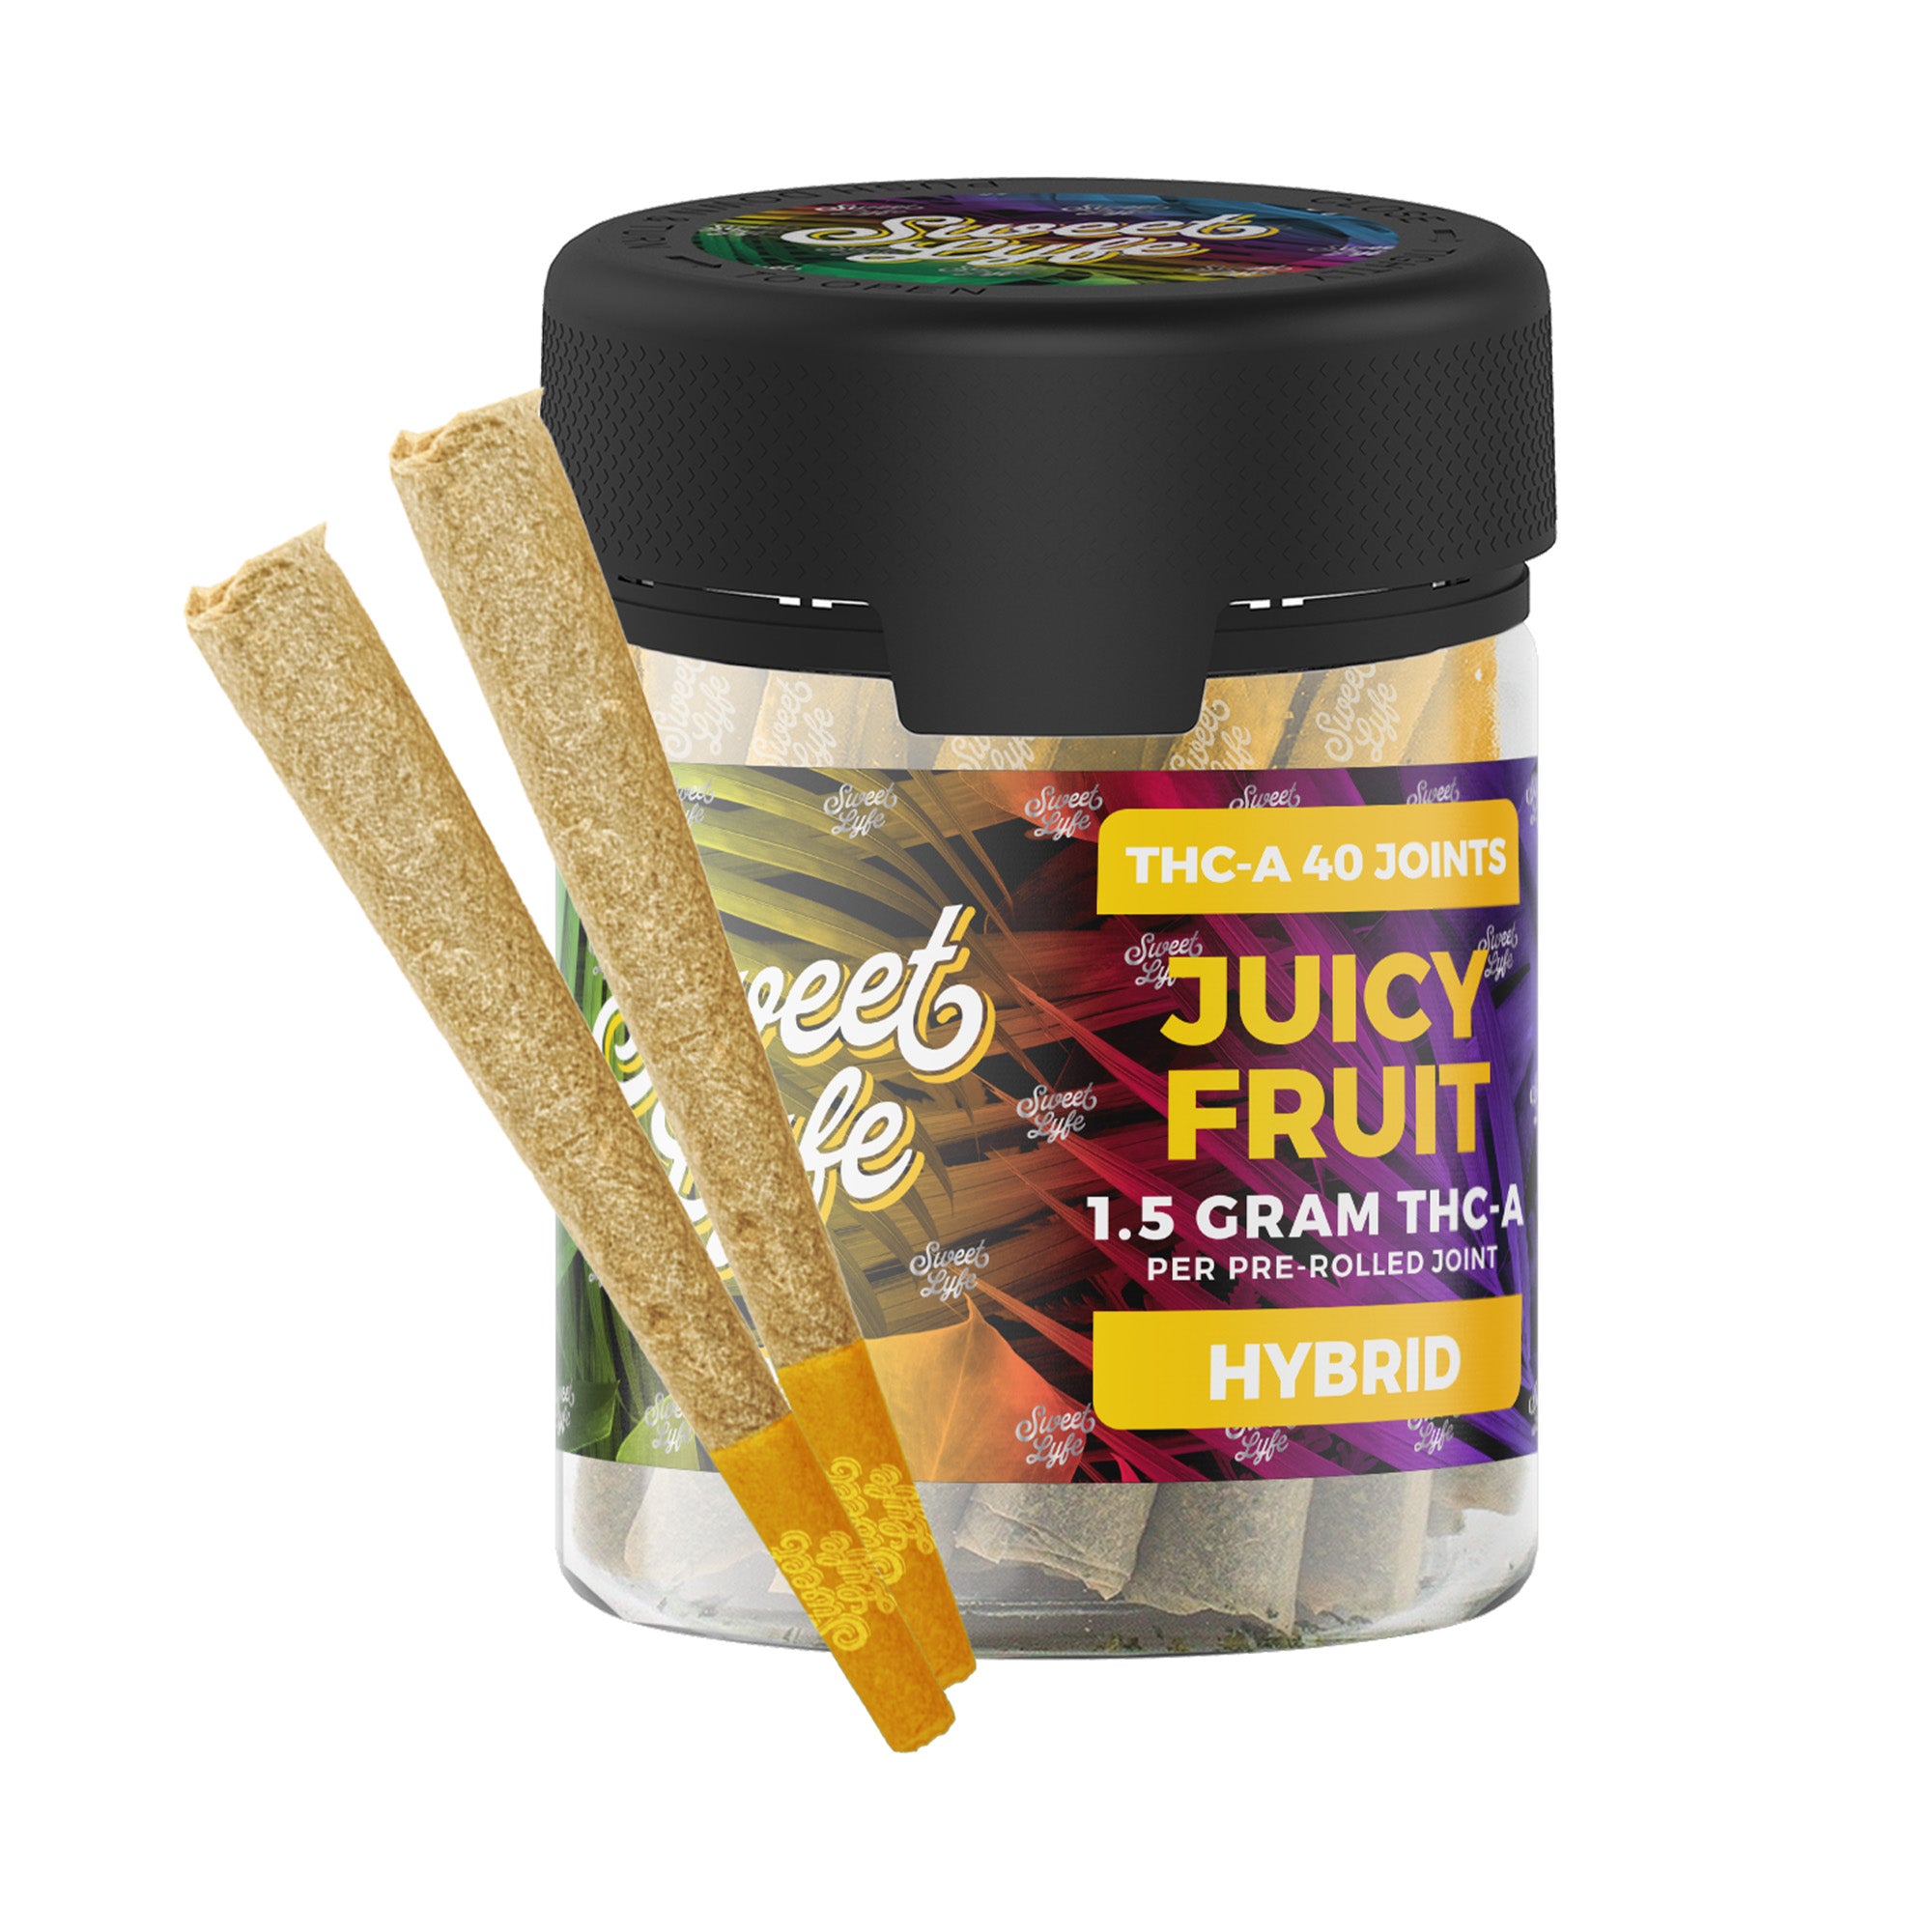 40 Pack of Joints THC-A - 1.5 gram TCH-A Per Joint Juicy Fruit - Hybrid